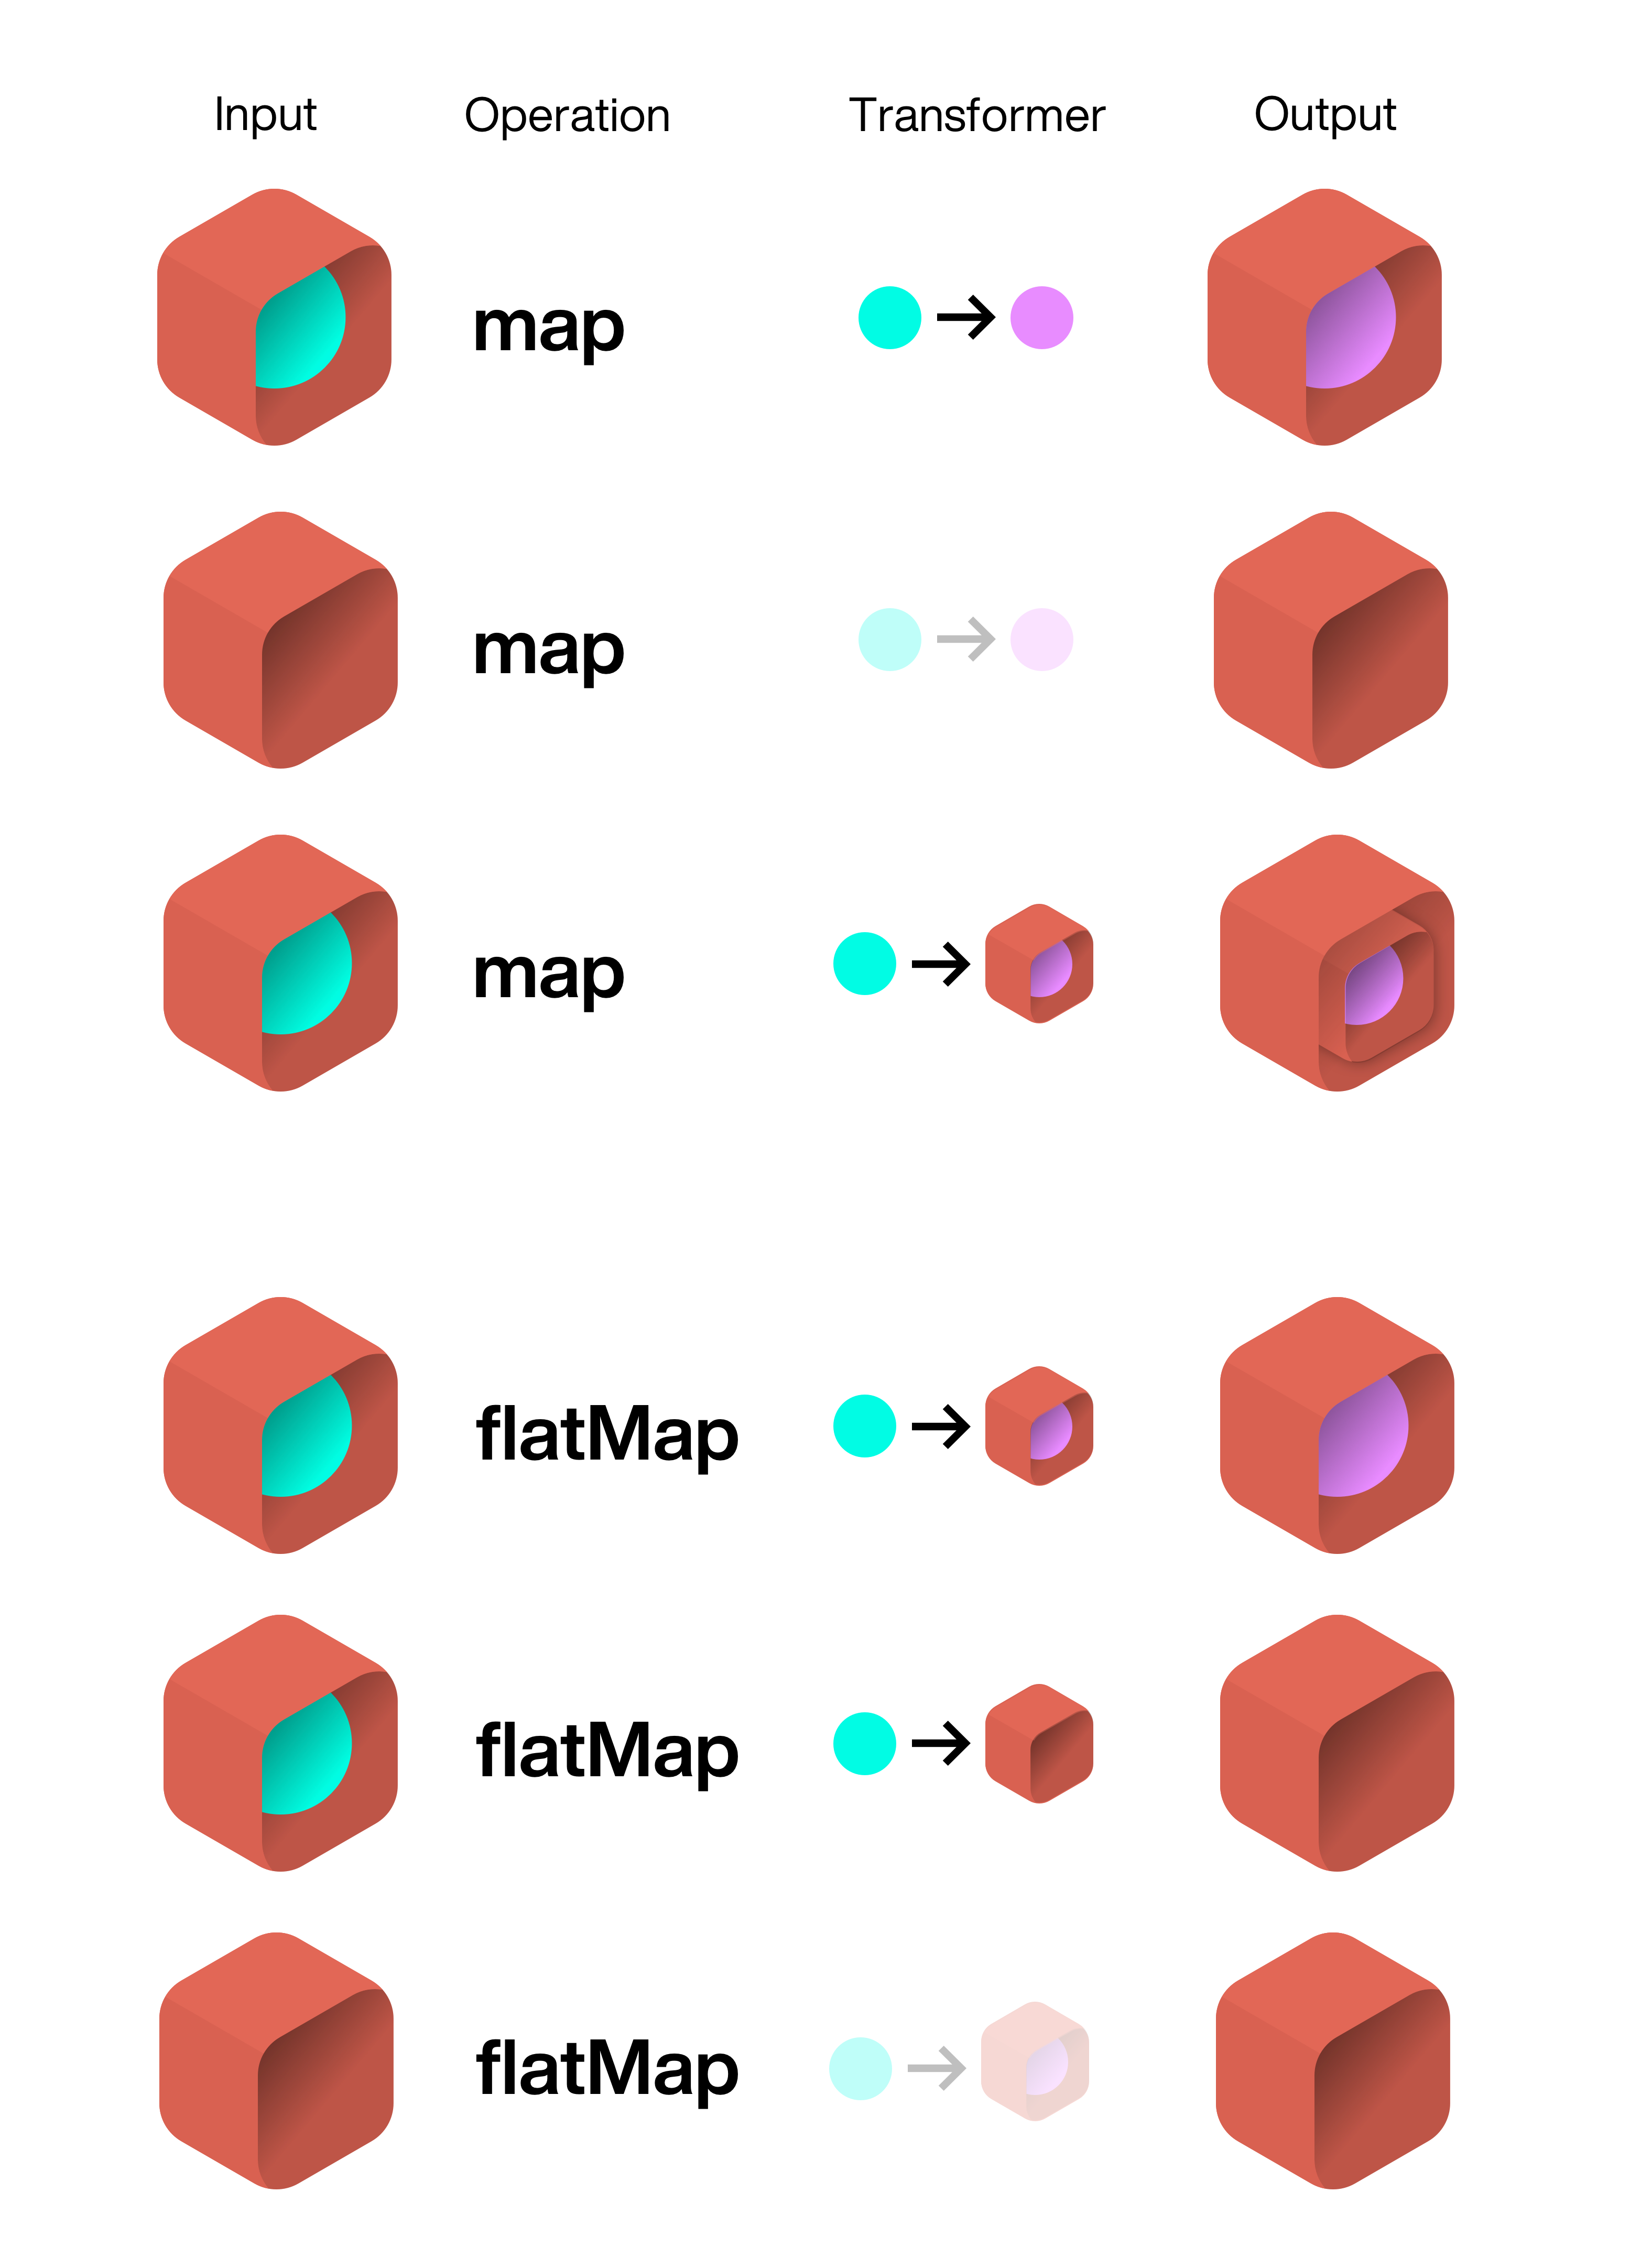 The map function transforms the value with a callback, the flatMap function returns an box itself